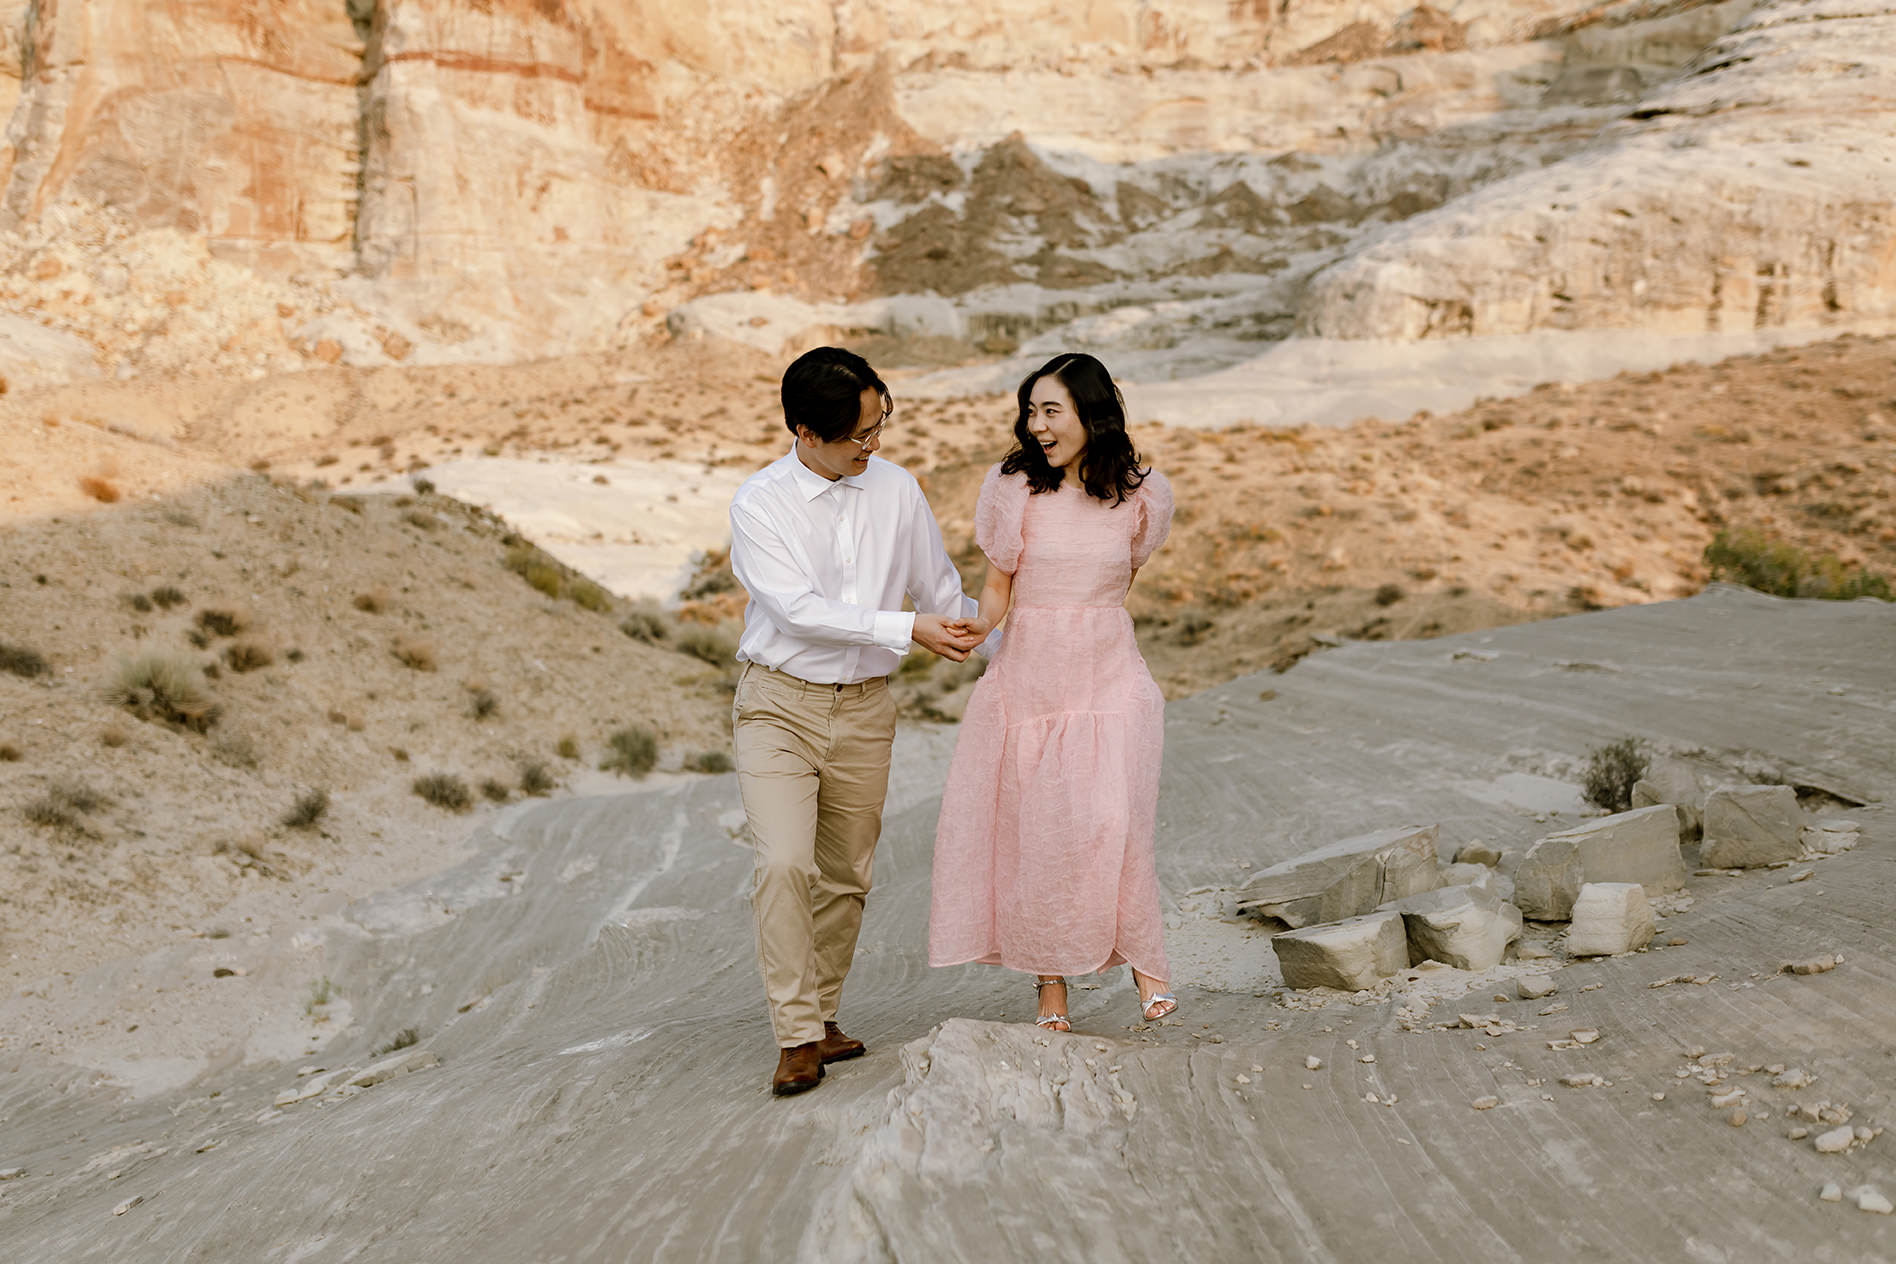 Husband and wife hold hands and laugh as they walk up a rocky desert hill.